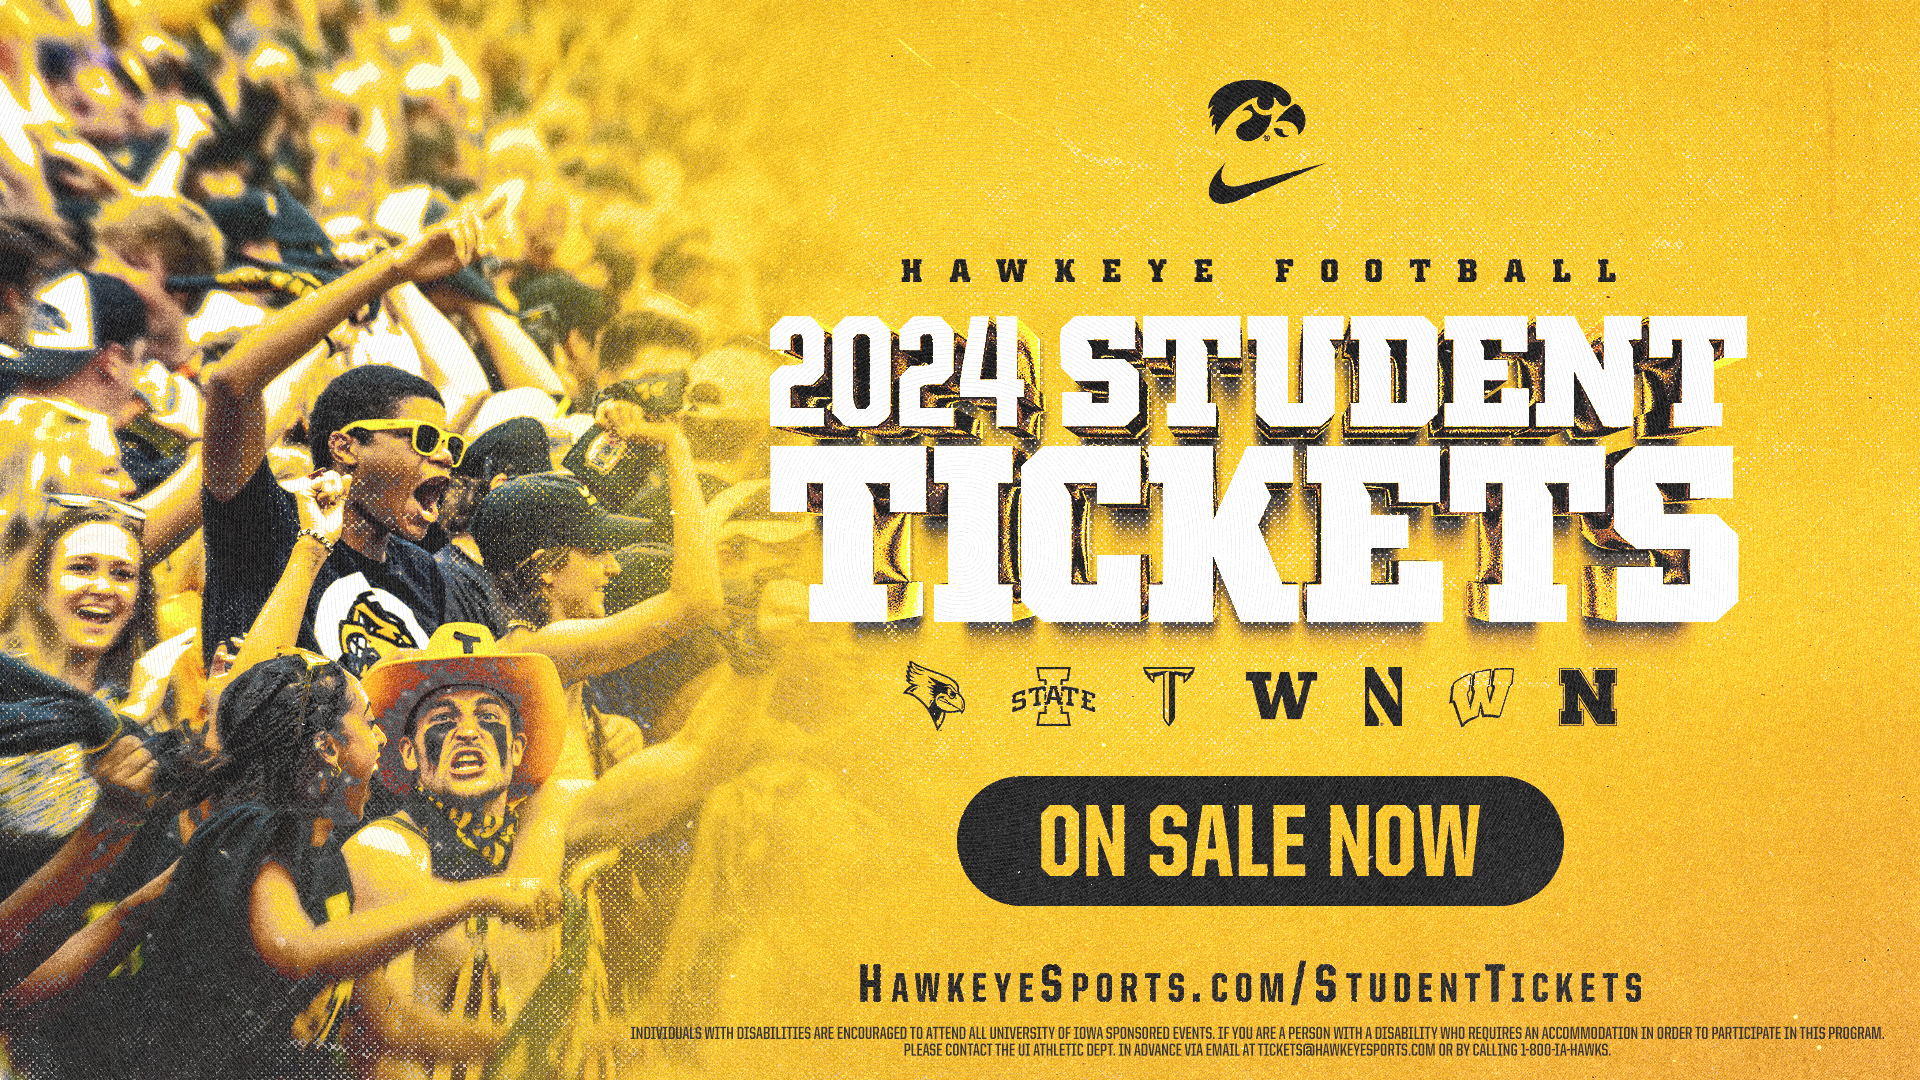 StudentTickets_OnSale  Sponsoring Org: Univ. of Iowa Intercollegiate Athletics  Name of Event: Iowa Football Student Ticket On Sale  Display Date Range: Tuesday, April 23 - Tuesday, May 7  Contact: Brian Clarke  Email: Brian-Clarke@uiowa.edu